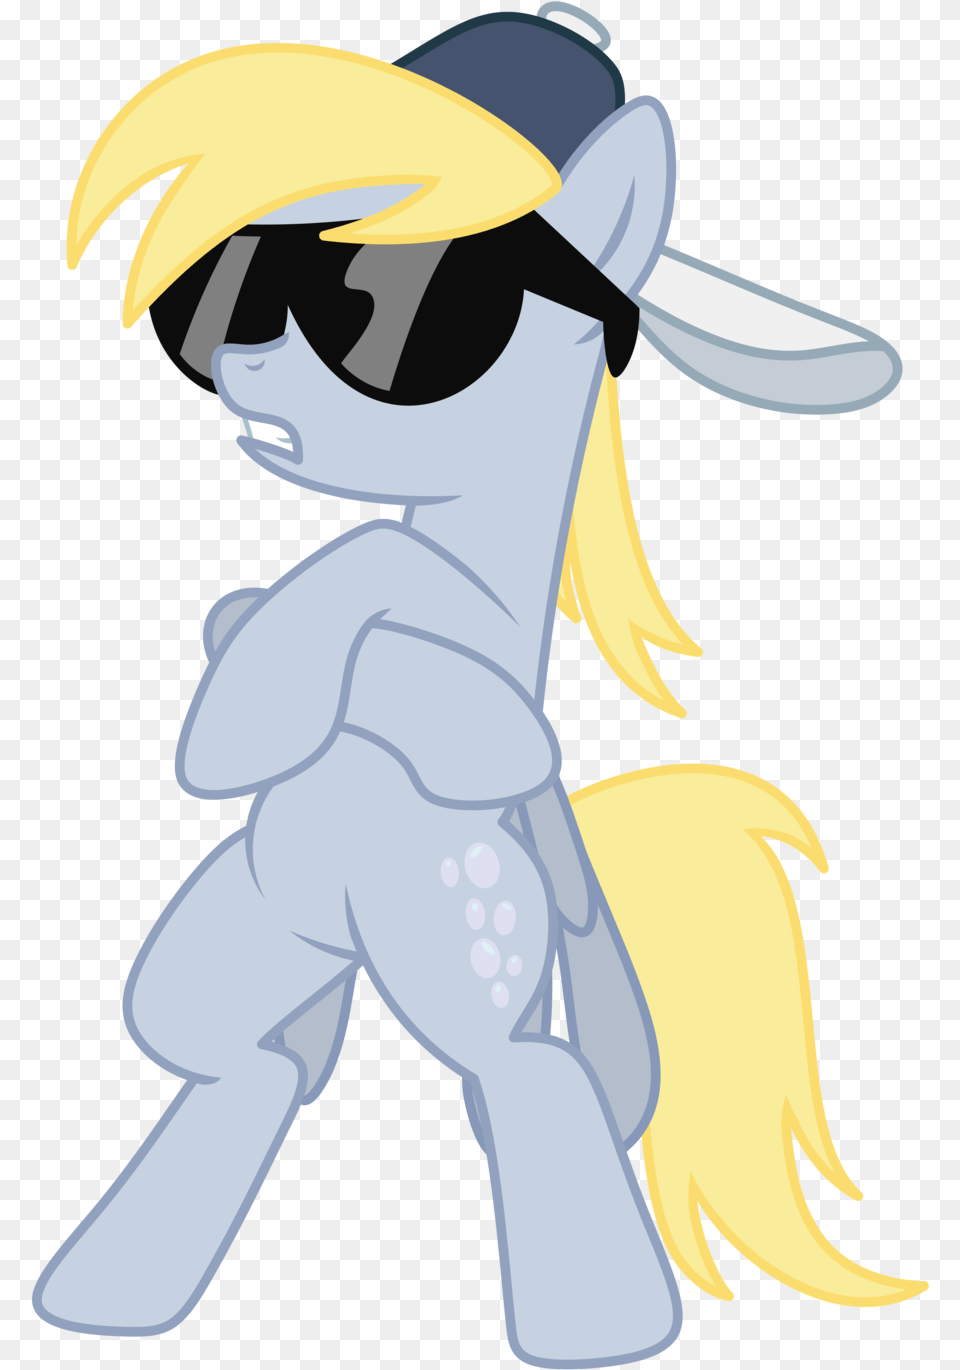 Derpy S Got Swag By Axemgr D4ollqp My Little Pony Rainbow Dash Glasses, Book, Comics, Publication, Baby Png Image